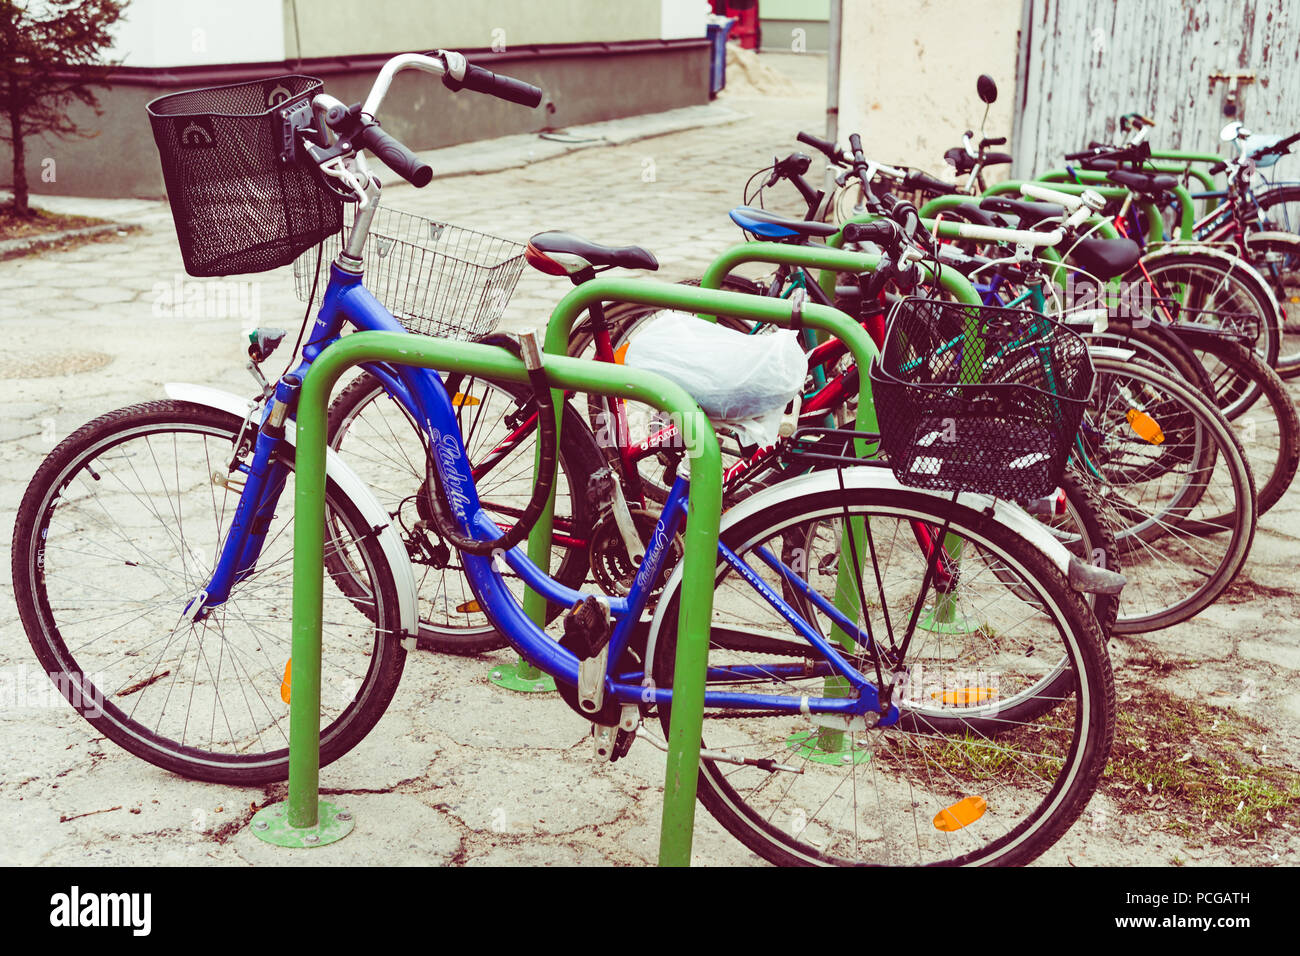 A row of commuters' bikes lined up and secured to racks with padlocks and cables in an urban environment.  Pollution free transport for healthy living Stock Photo